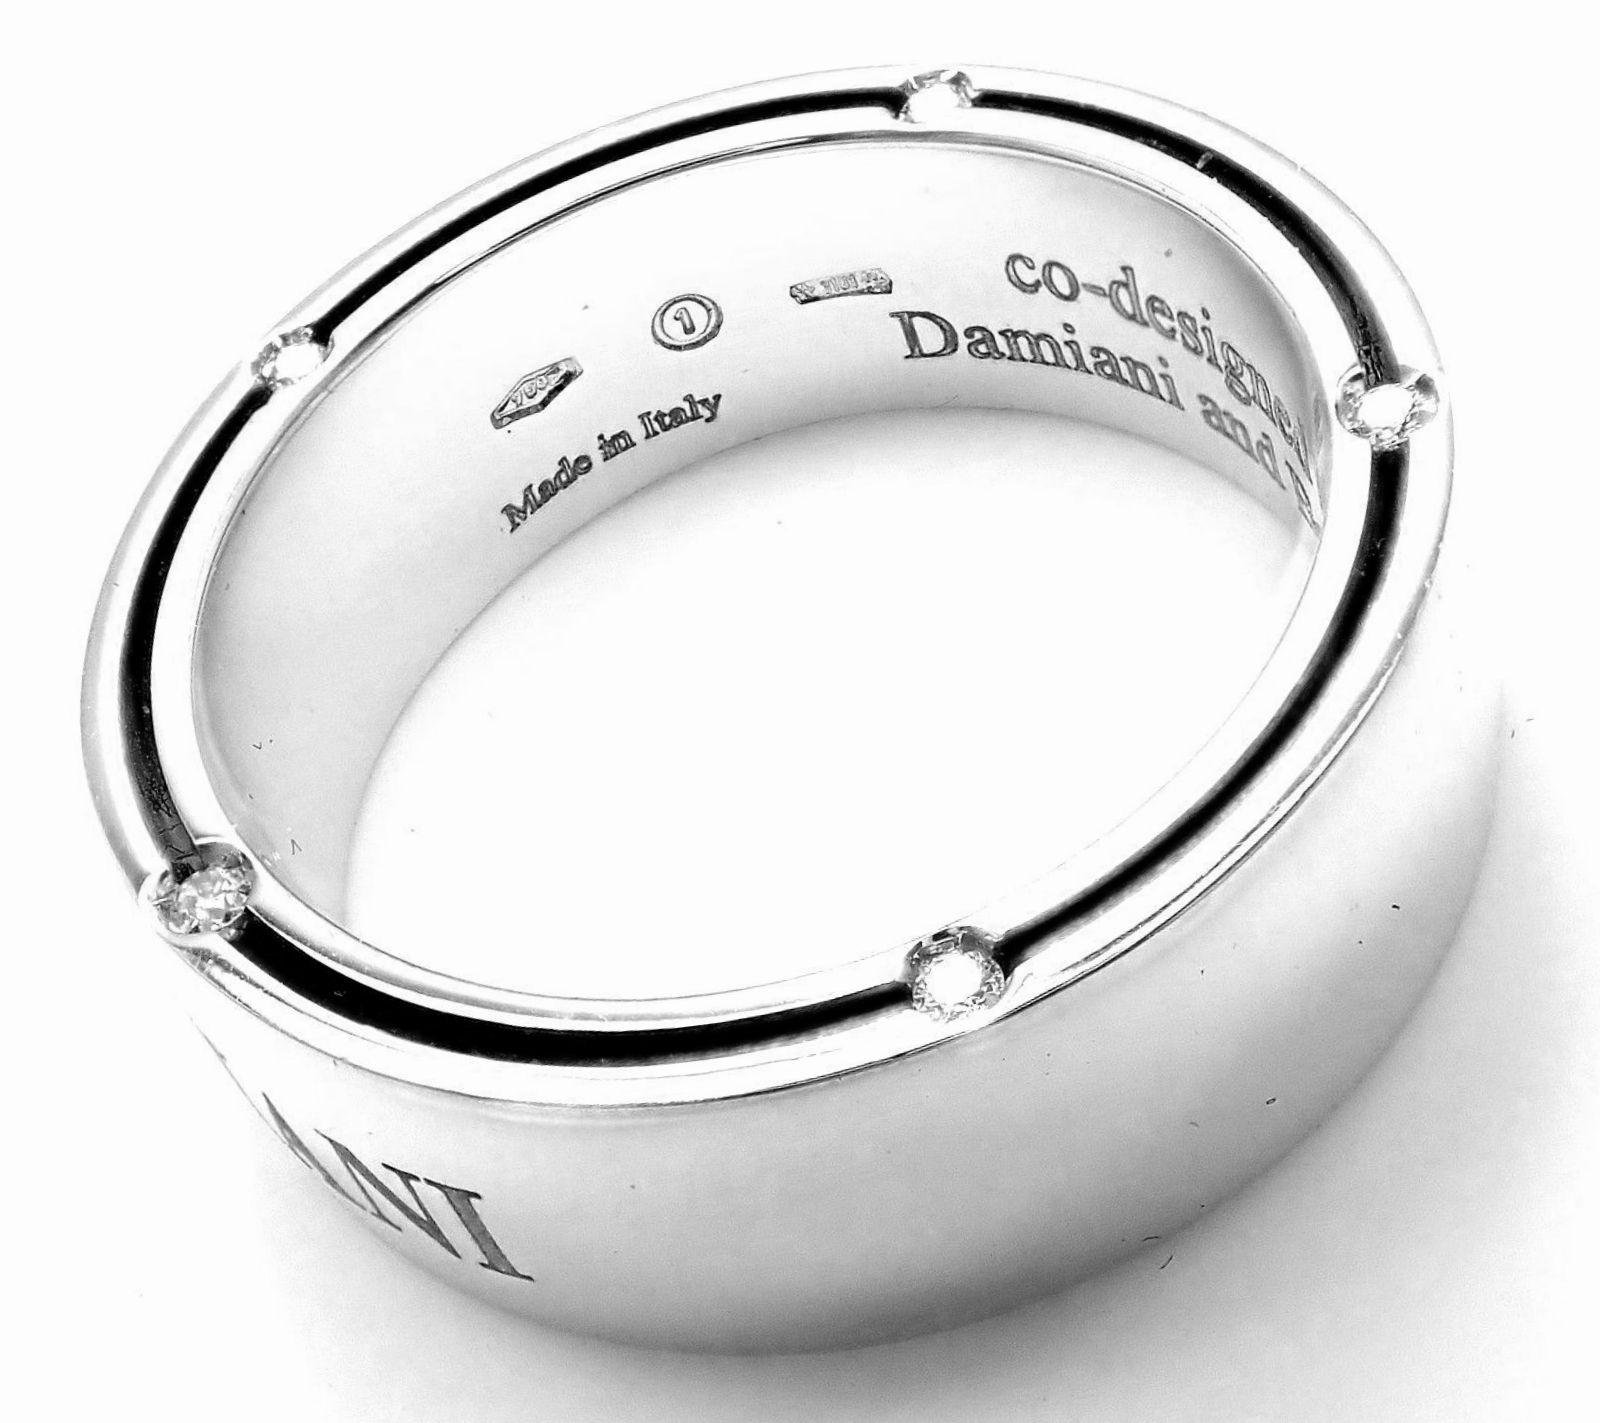 18k White Gold Diamond Band Ring by Damiani And Brad Pitt.
With 5 round brilliant cut diamonds total weight approx .10ct VS1 clarity, G color.
Retail Price: $3,590
This ring comes with Damiani Box + Paperwork.
Details:
Size: 7.5
Weight: 11.4